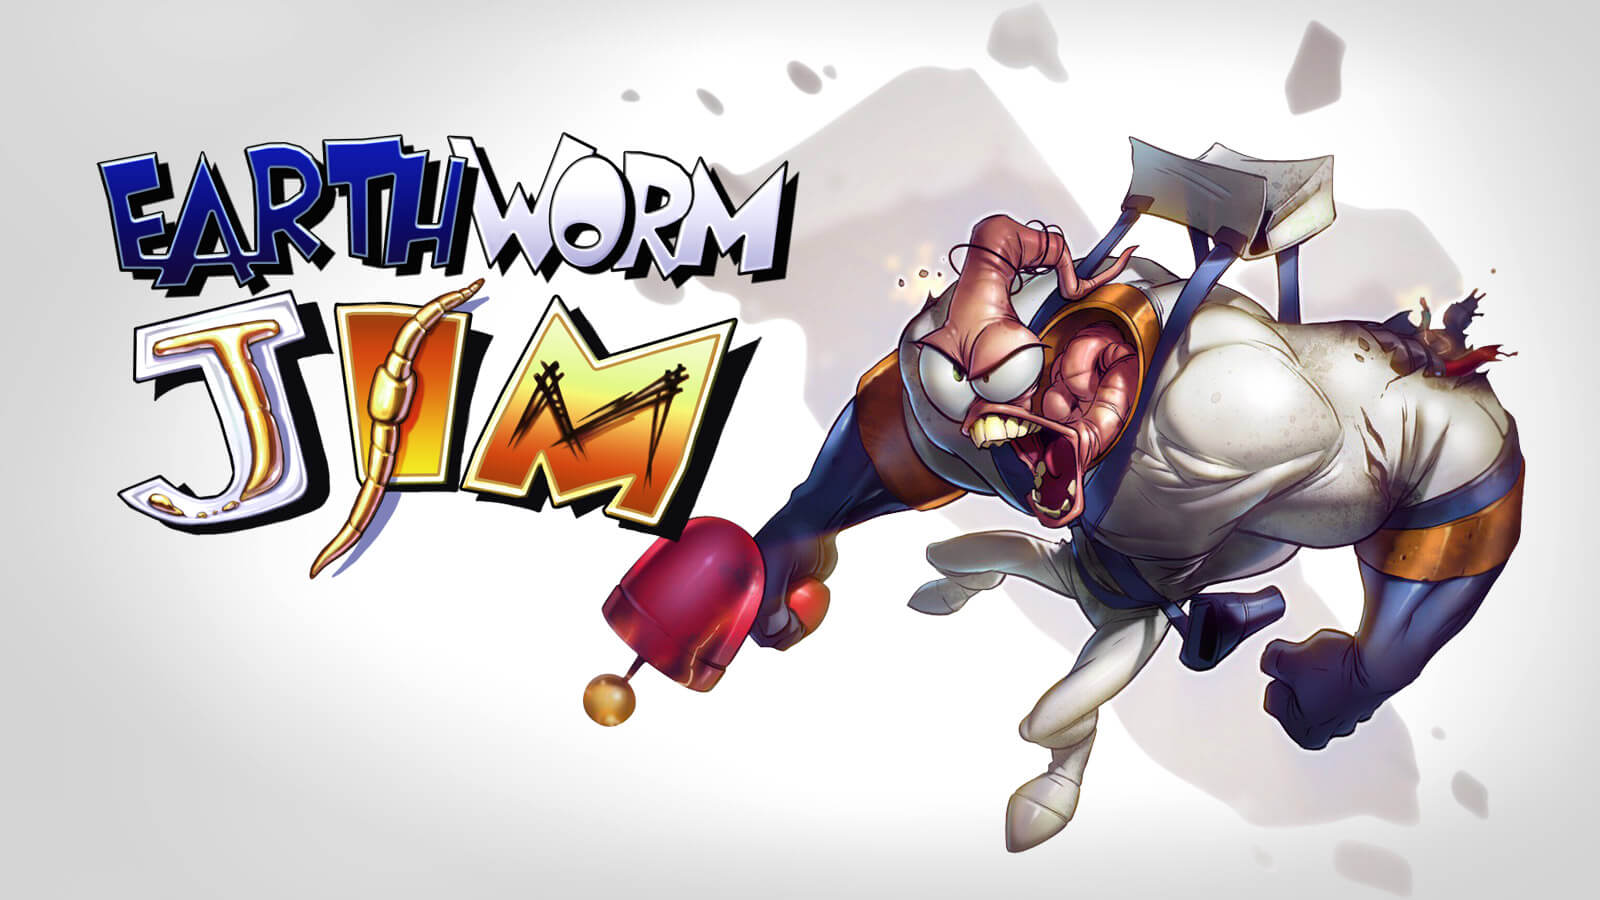 New Earthworm Jim Game Coming In 2020